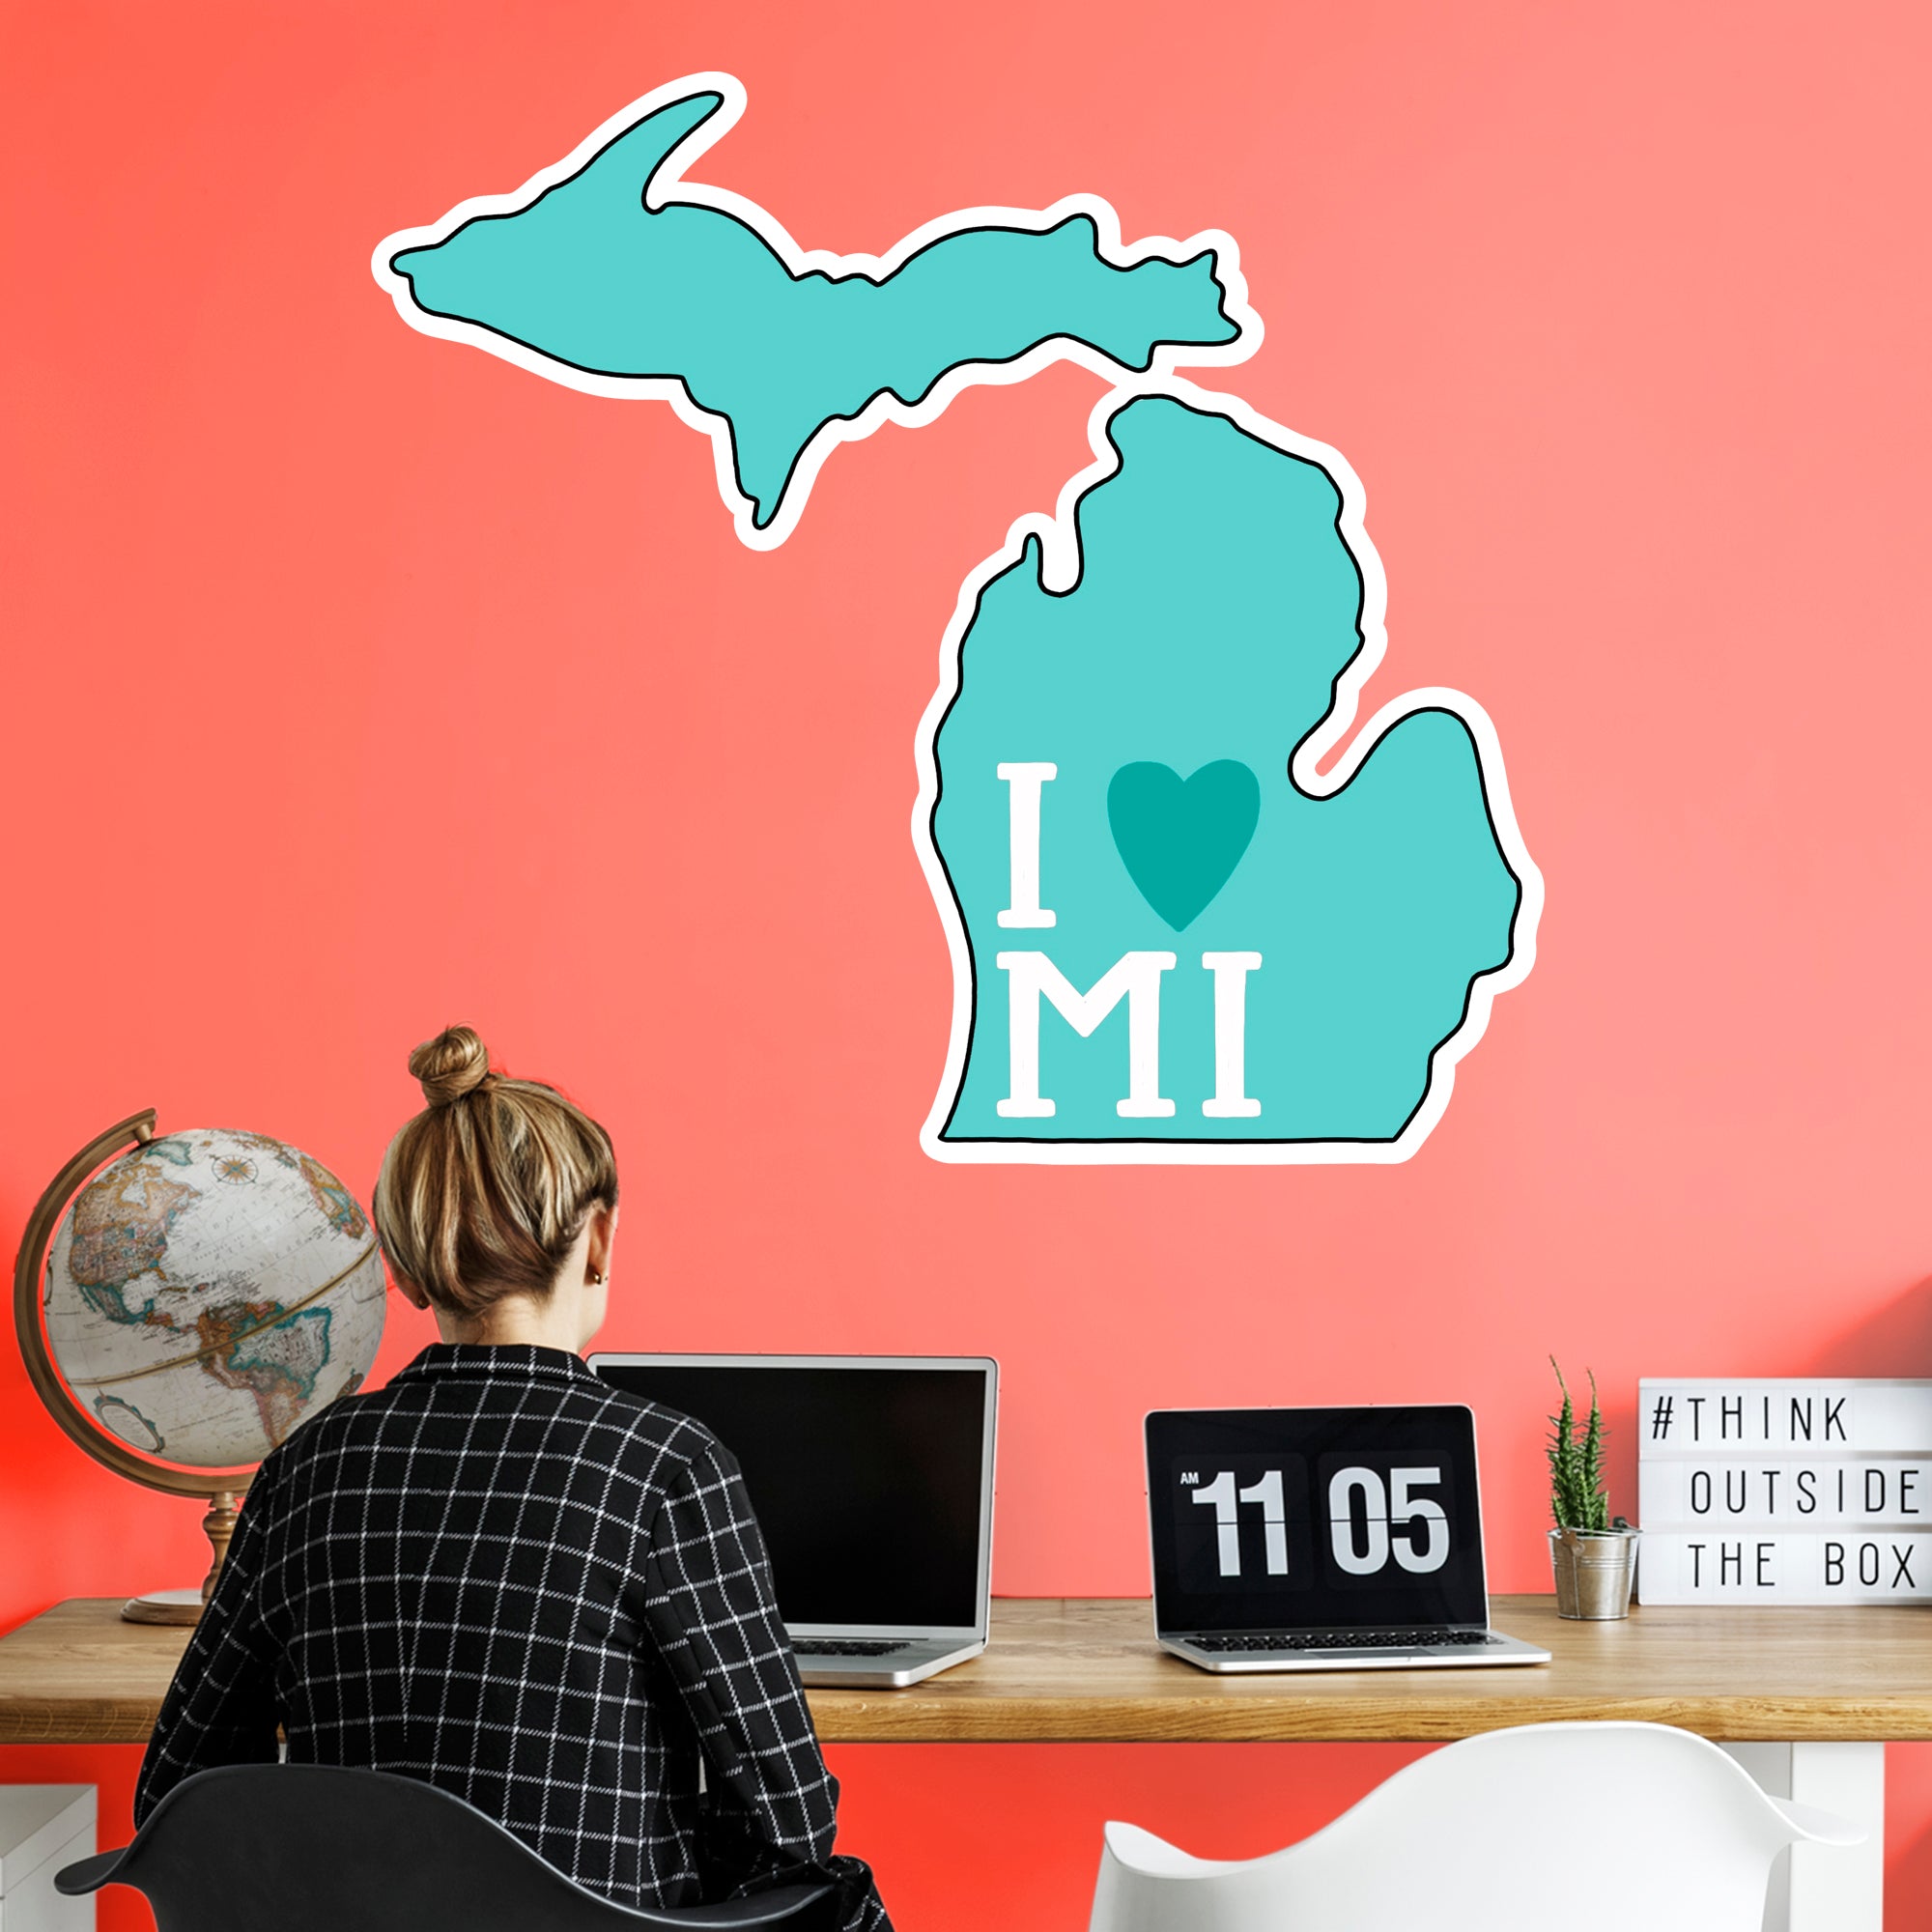 I Love Michigan - Officially Licensed Big Moods Removable Wall Decal Giant Decal (41"W x 38"H) by Fathead | Vinyl